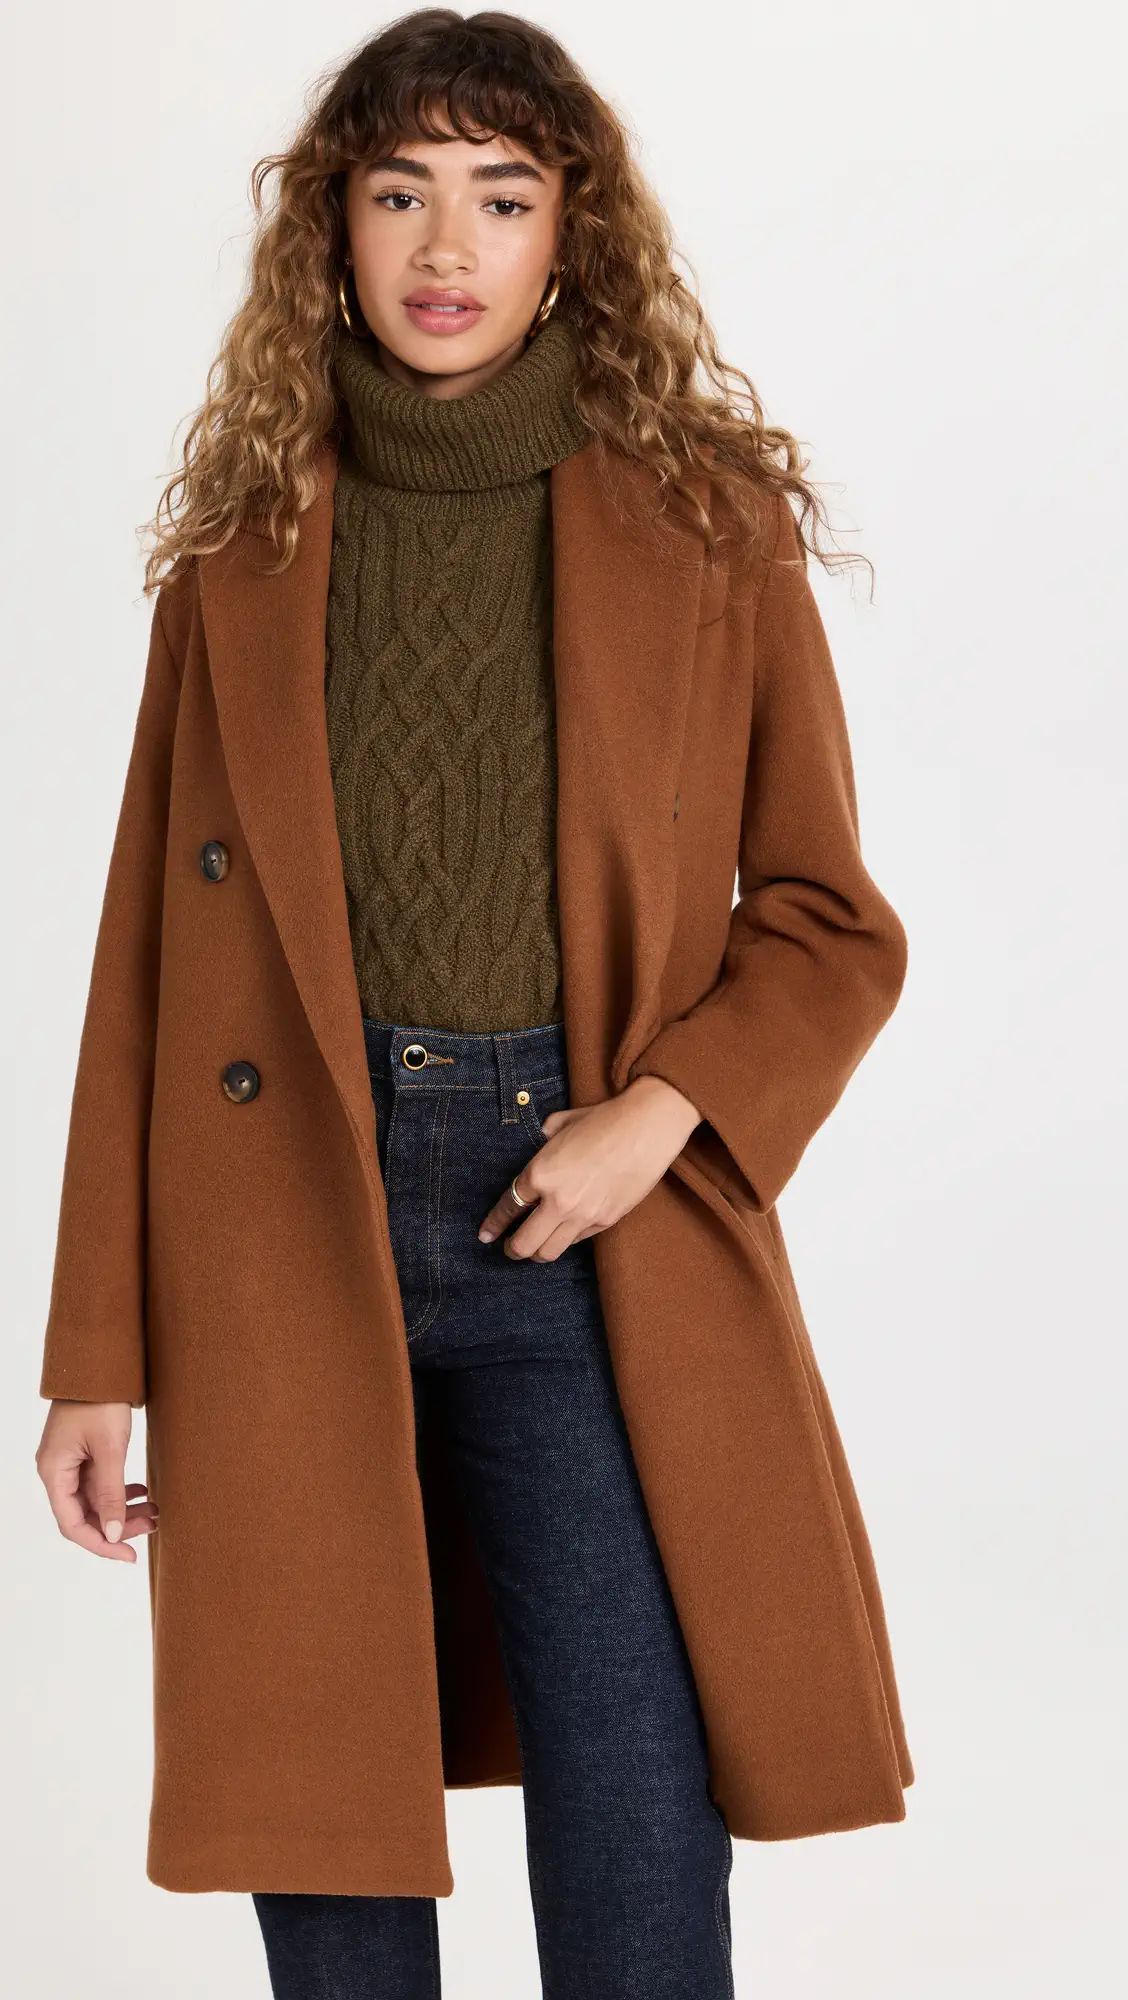 Brushed Wool Double Breast Coat | Shopbop